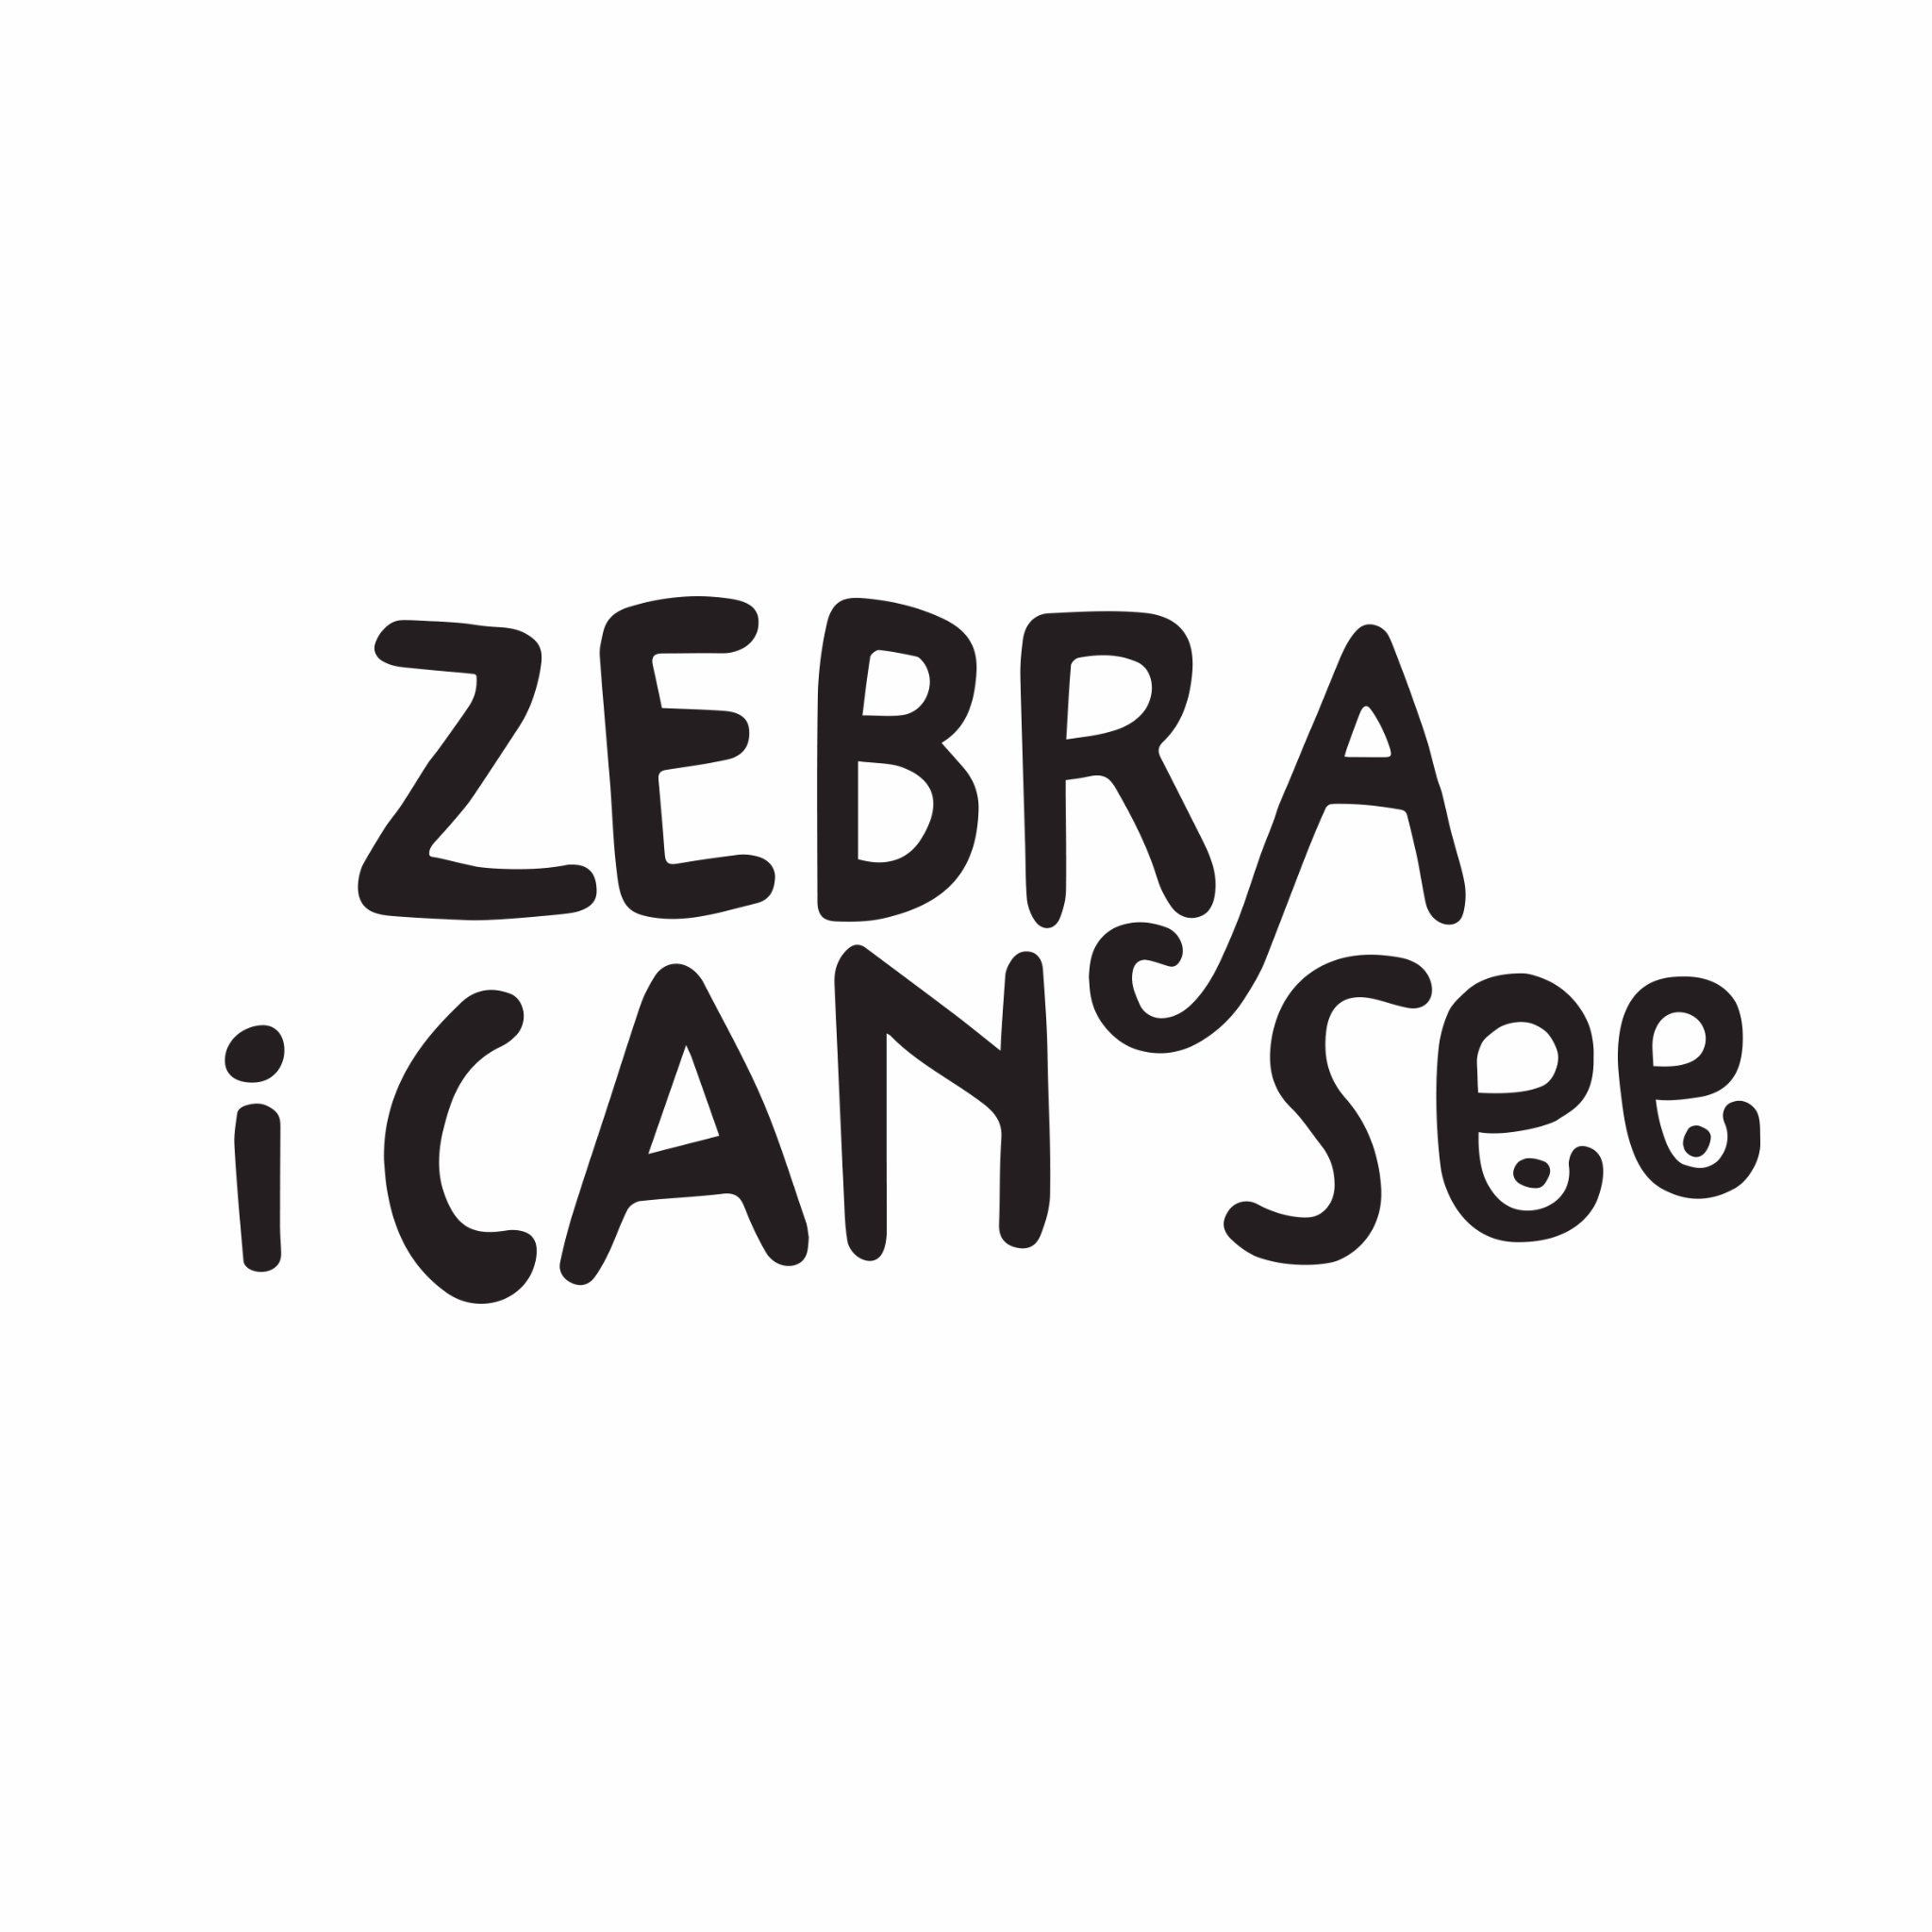 Zebra I Can See • ORGANIC clothes for busy kids • info@zebraicansee.com